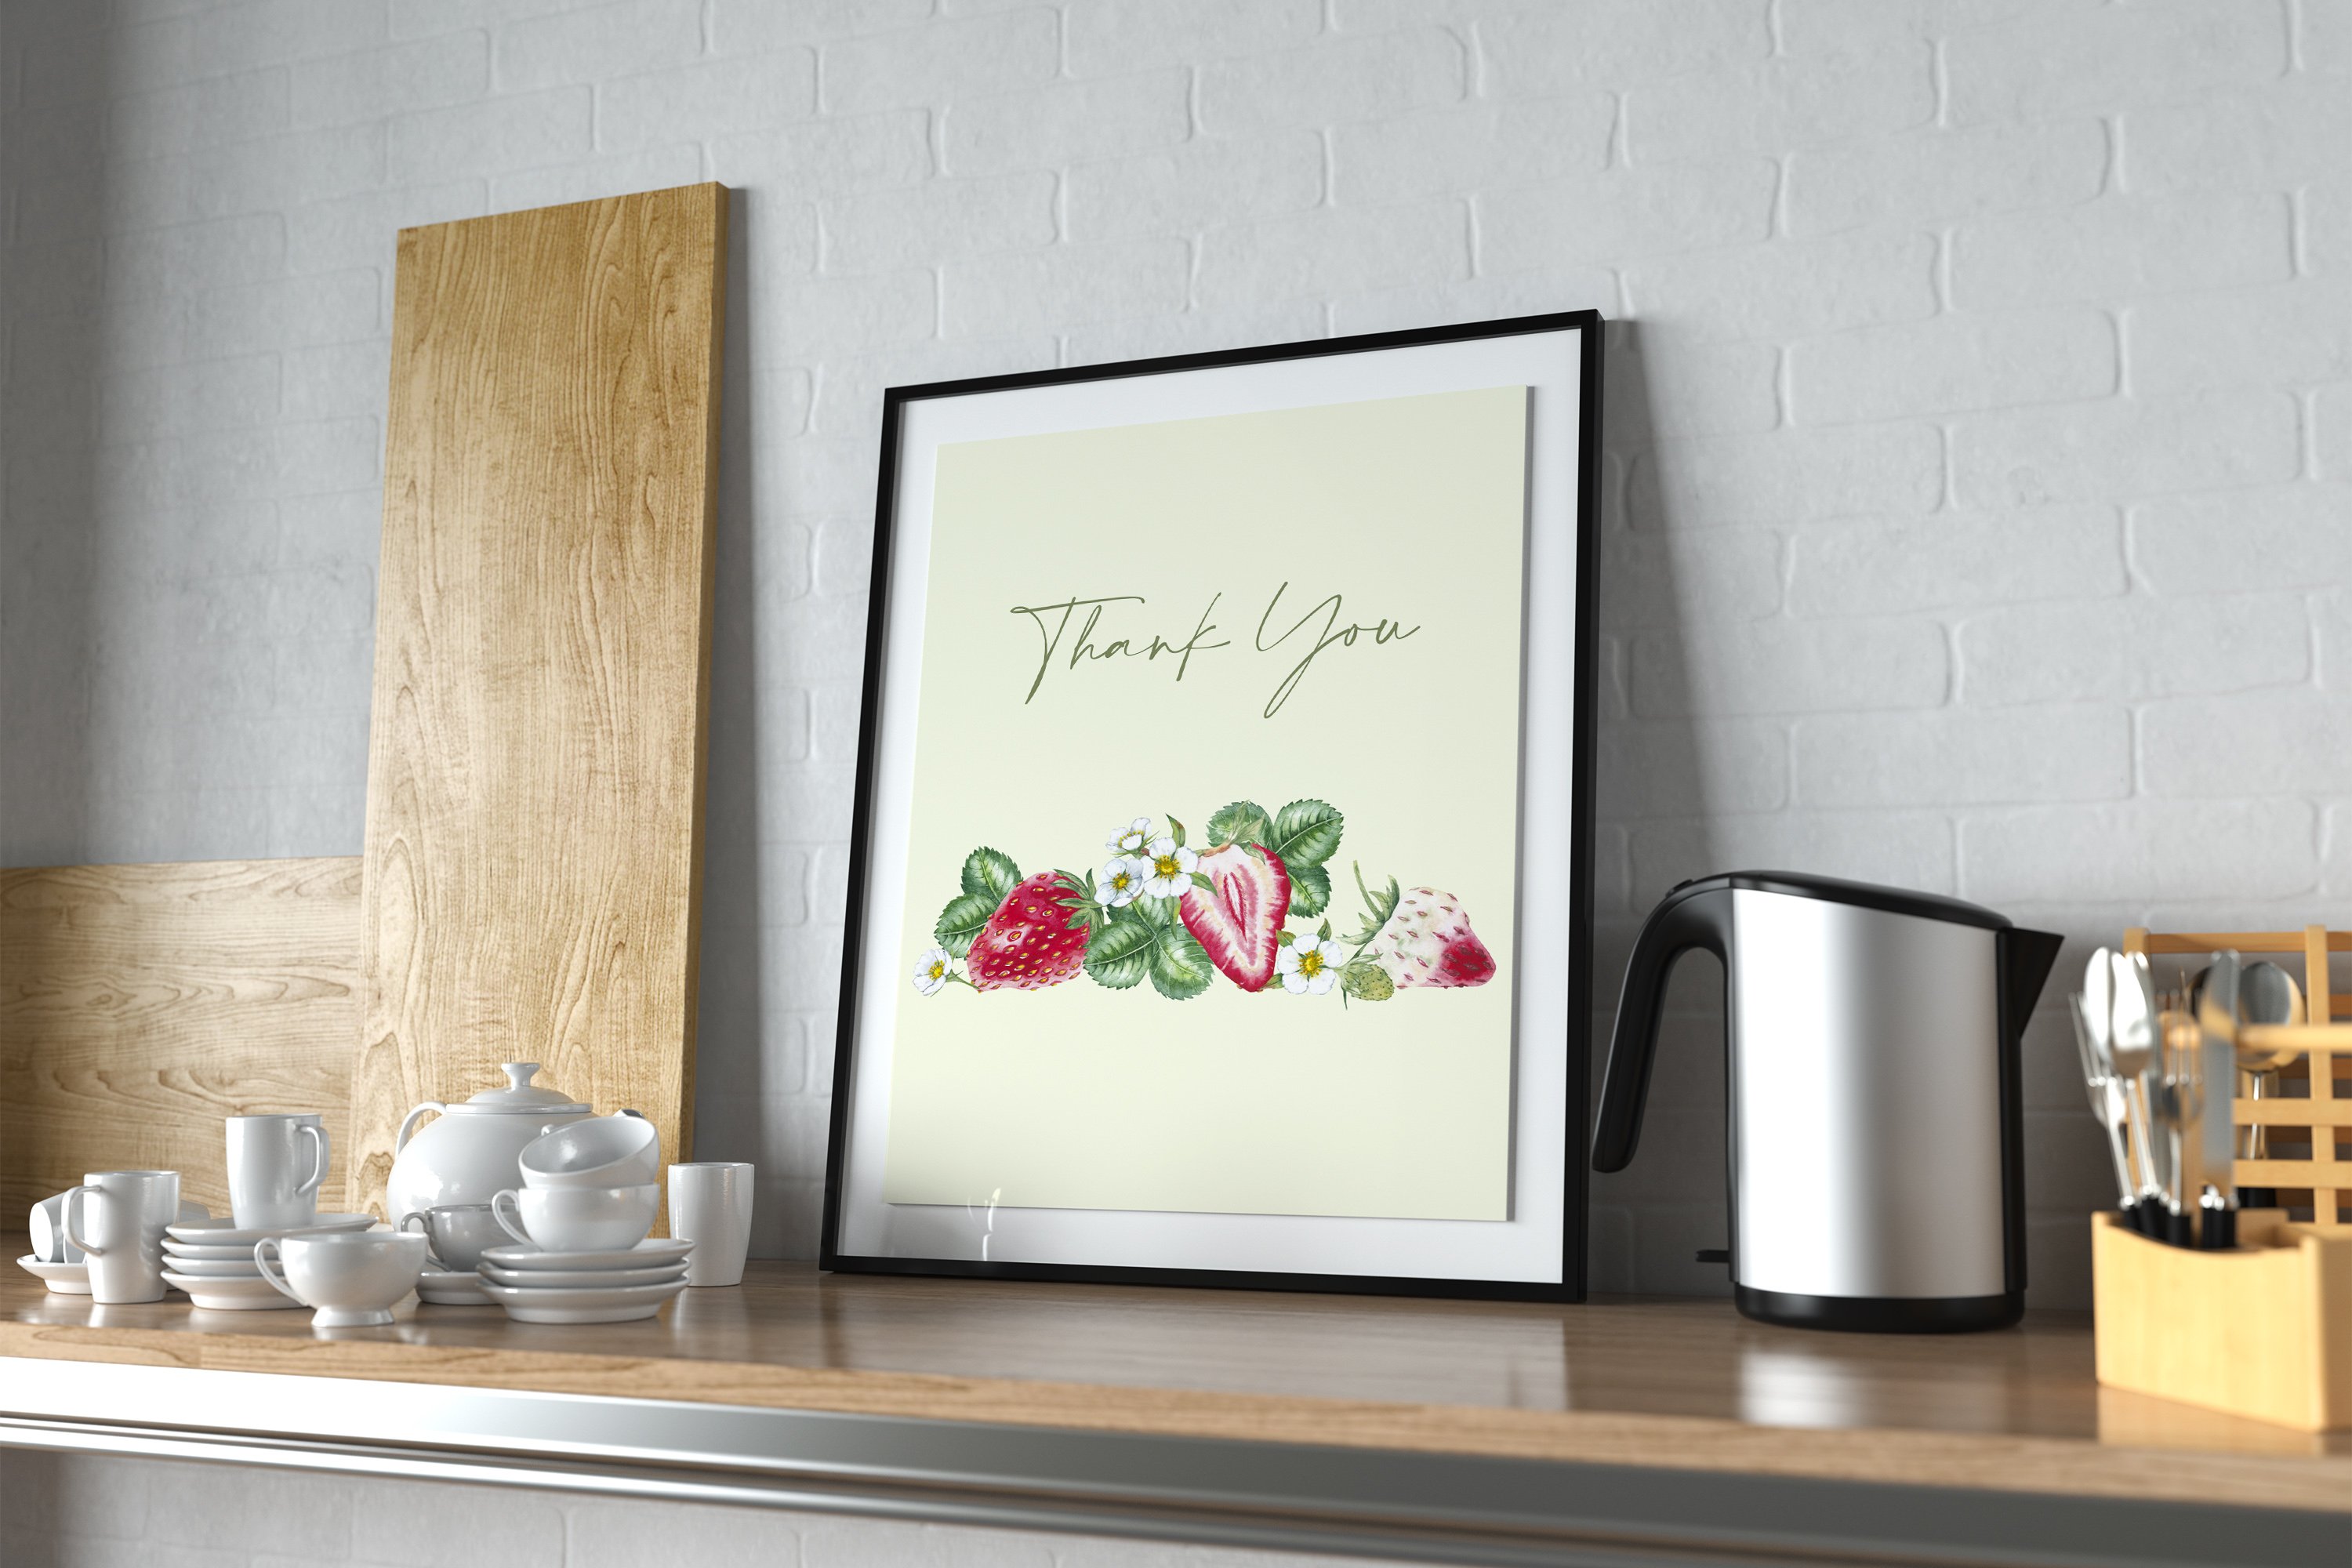 White painting in black frame with black lettering "Thank you" and illustrations of a strawberry.